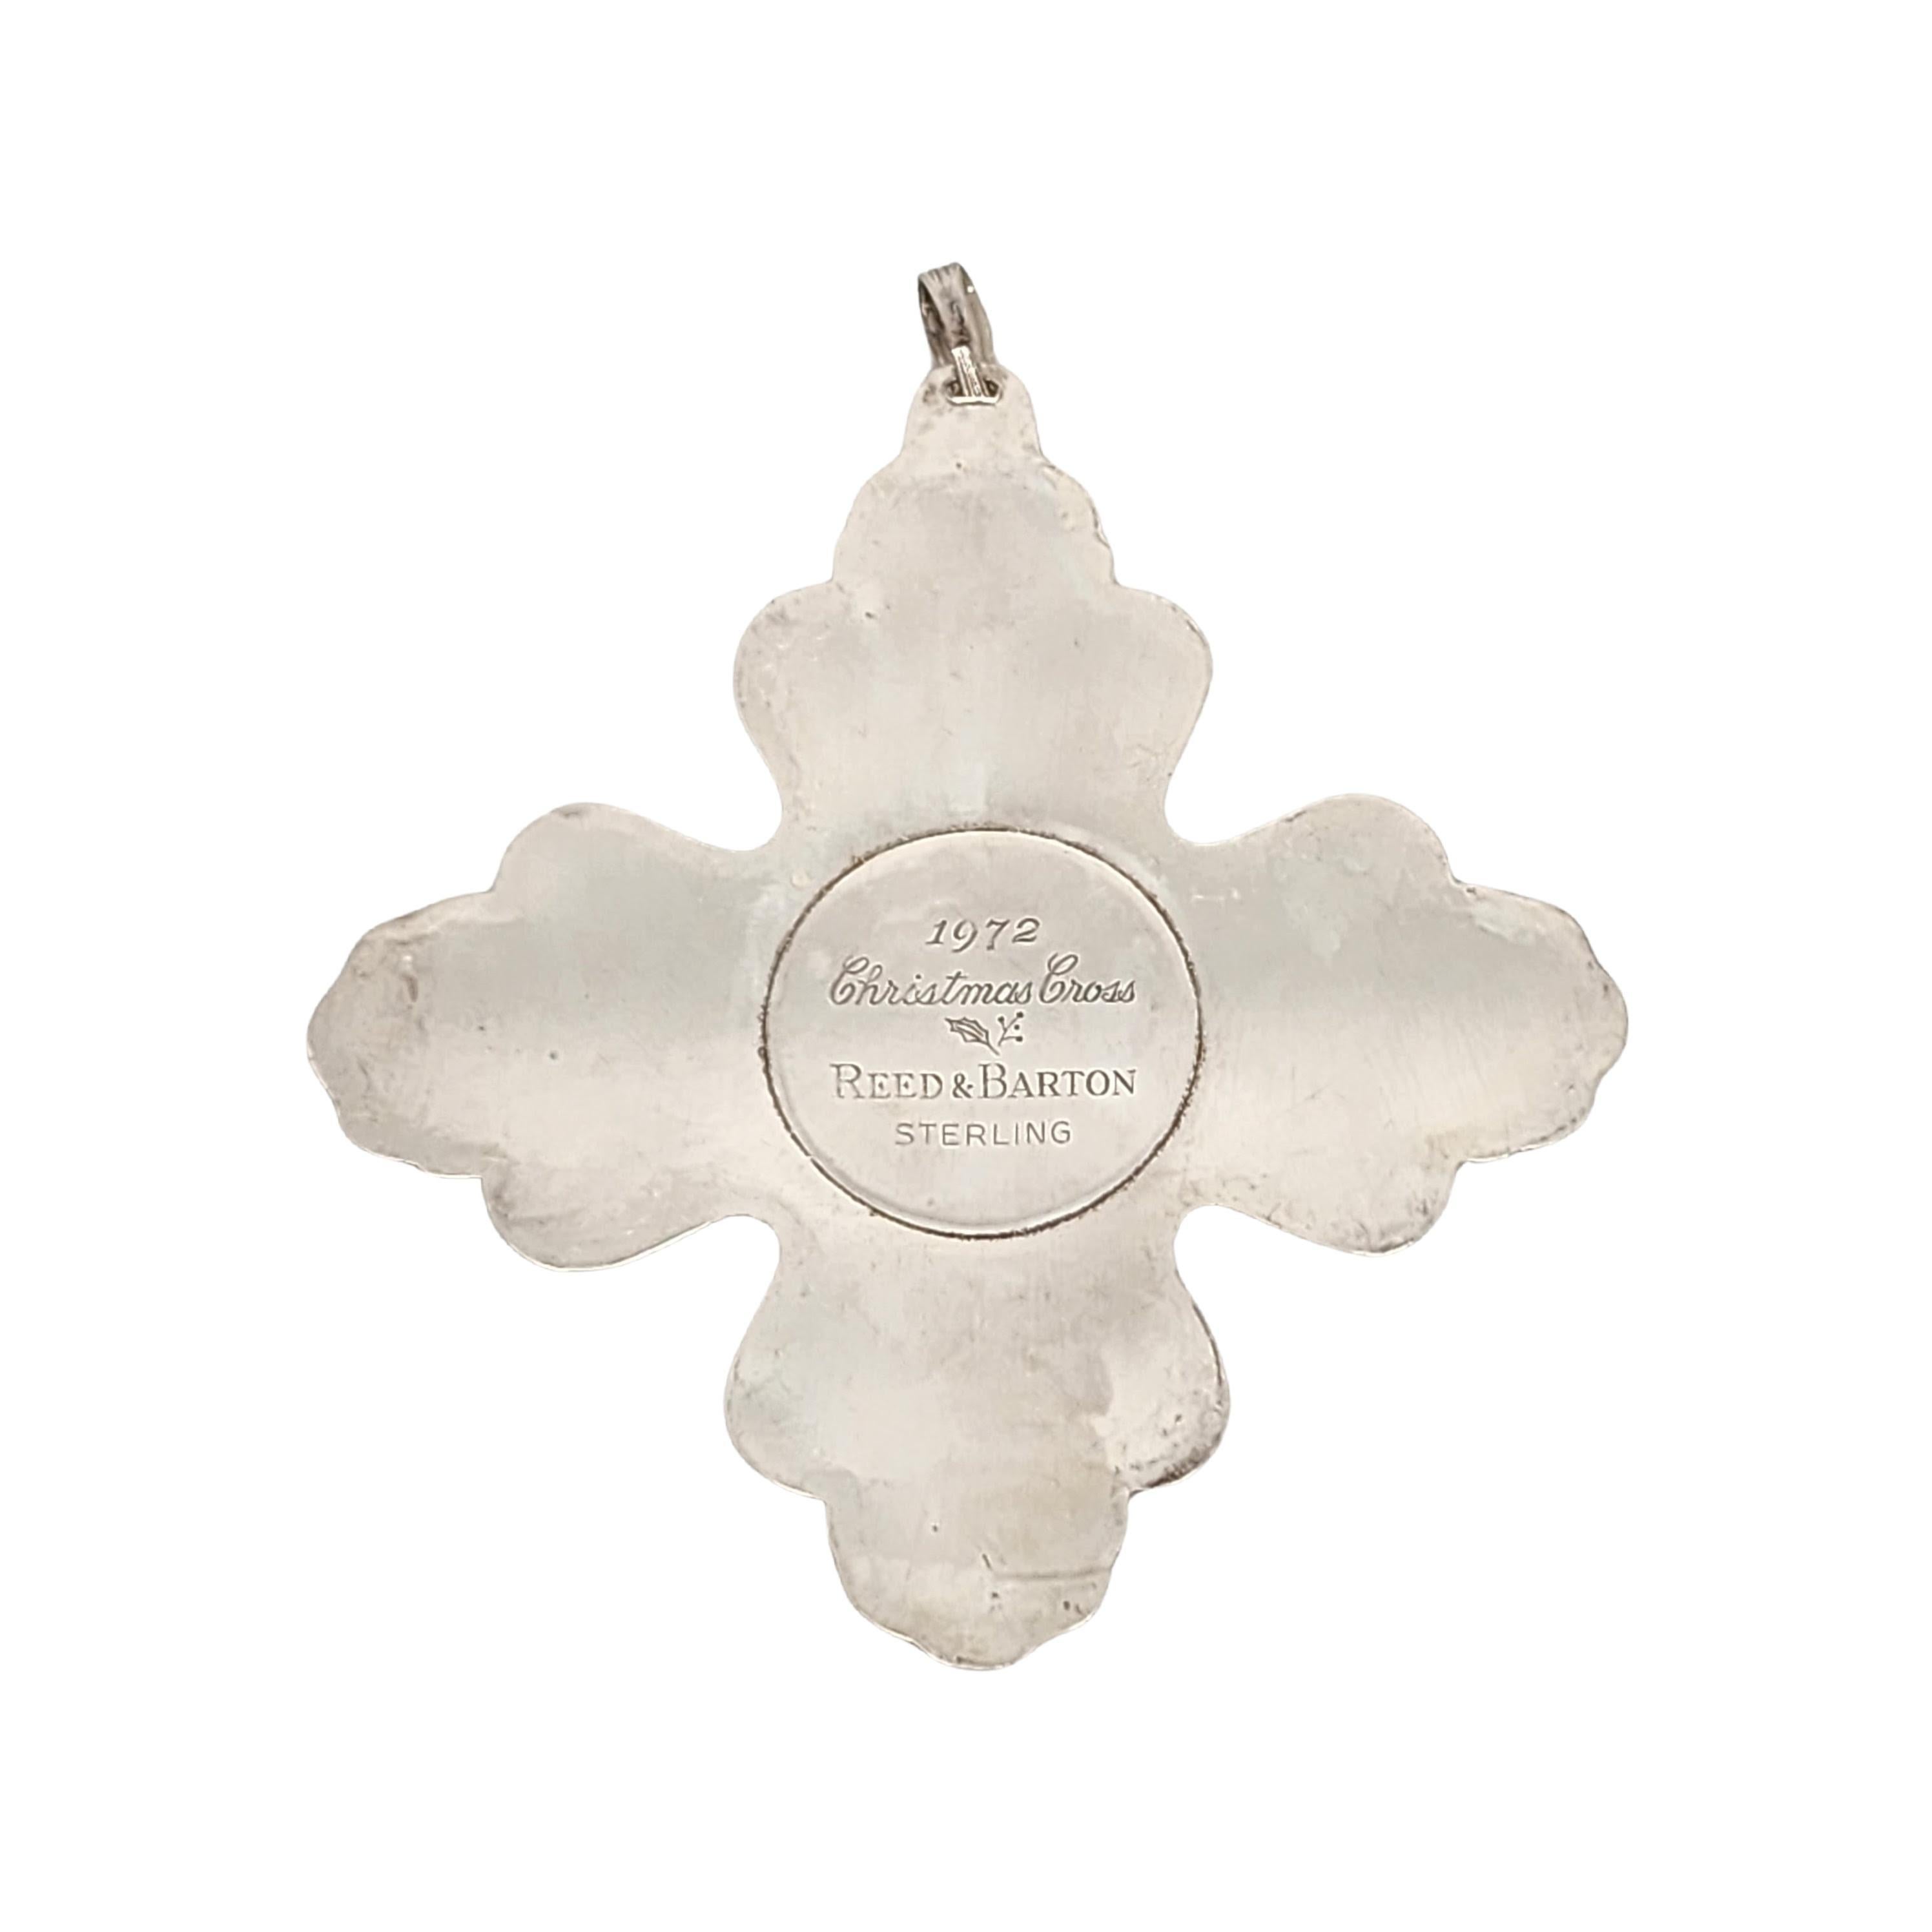 Reed & Barton sterling silver Christmas Cross ornament from 1972.

Since 1970, Reed & Barton has been celebrating the season with a yearly version of the Christmas Cross, creating a beautiful tradition of sparkling art.

Measures approx 3 1/2